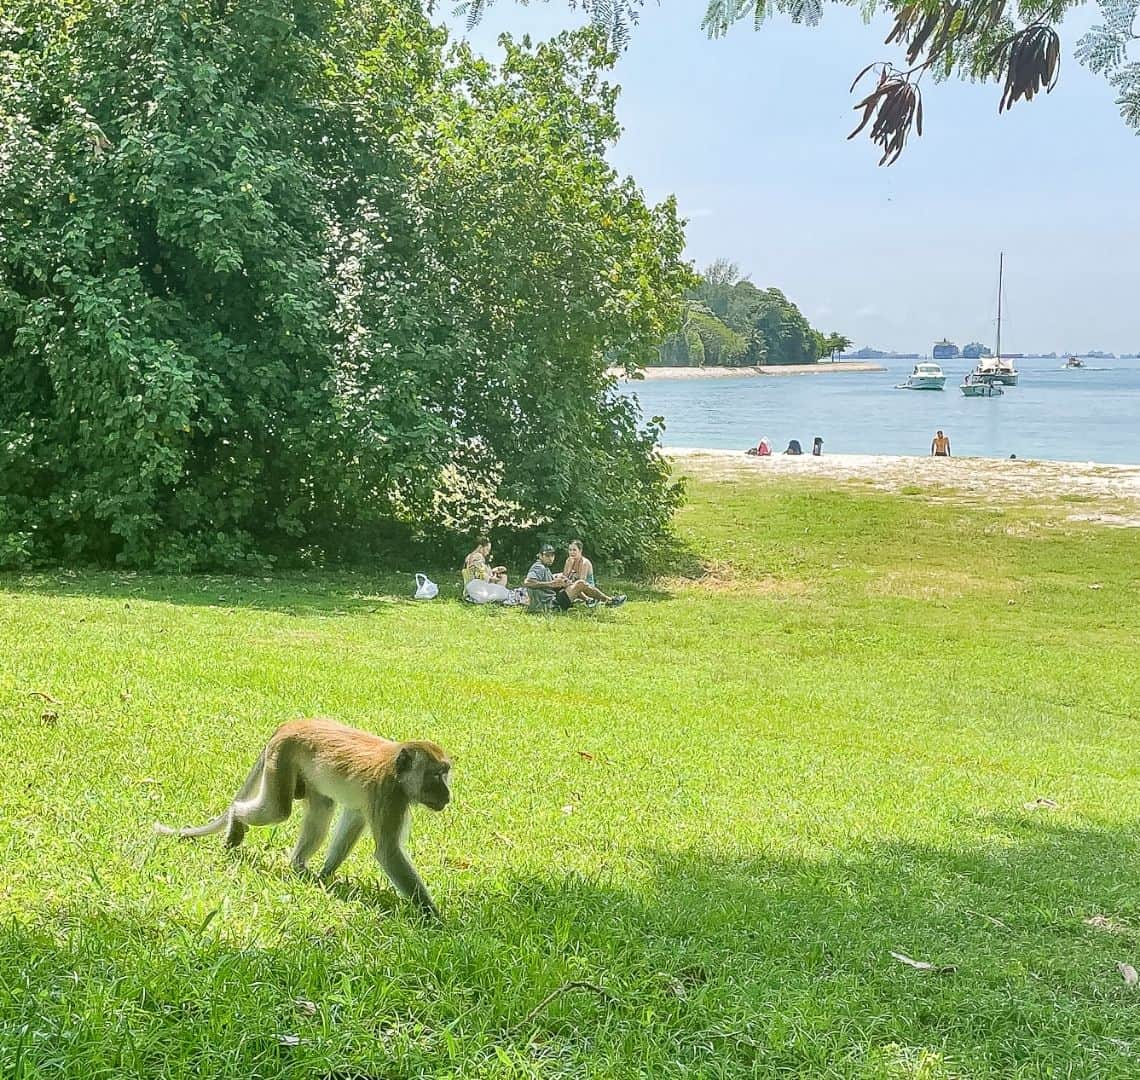 A large grassy area with a monkey in the foreground crossing it. In the background is a family picnicking. the beach with some more people, the lagoon with three boats and the open sea with some container ships. 